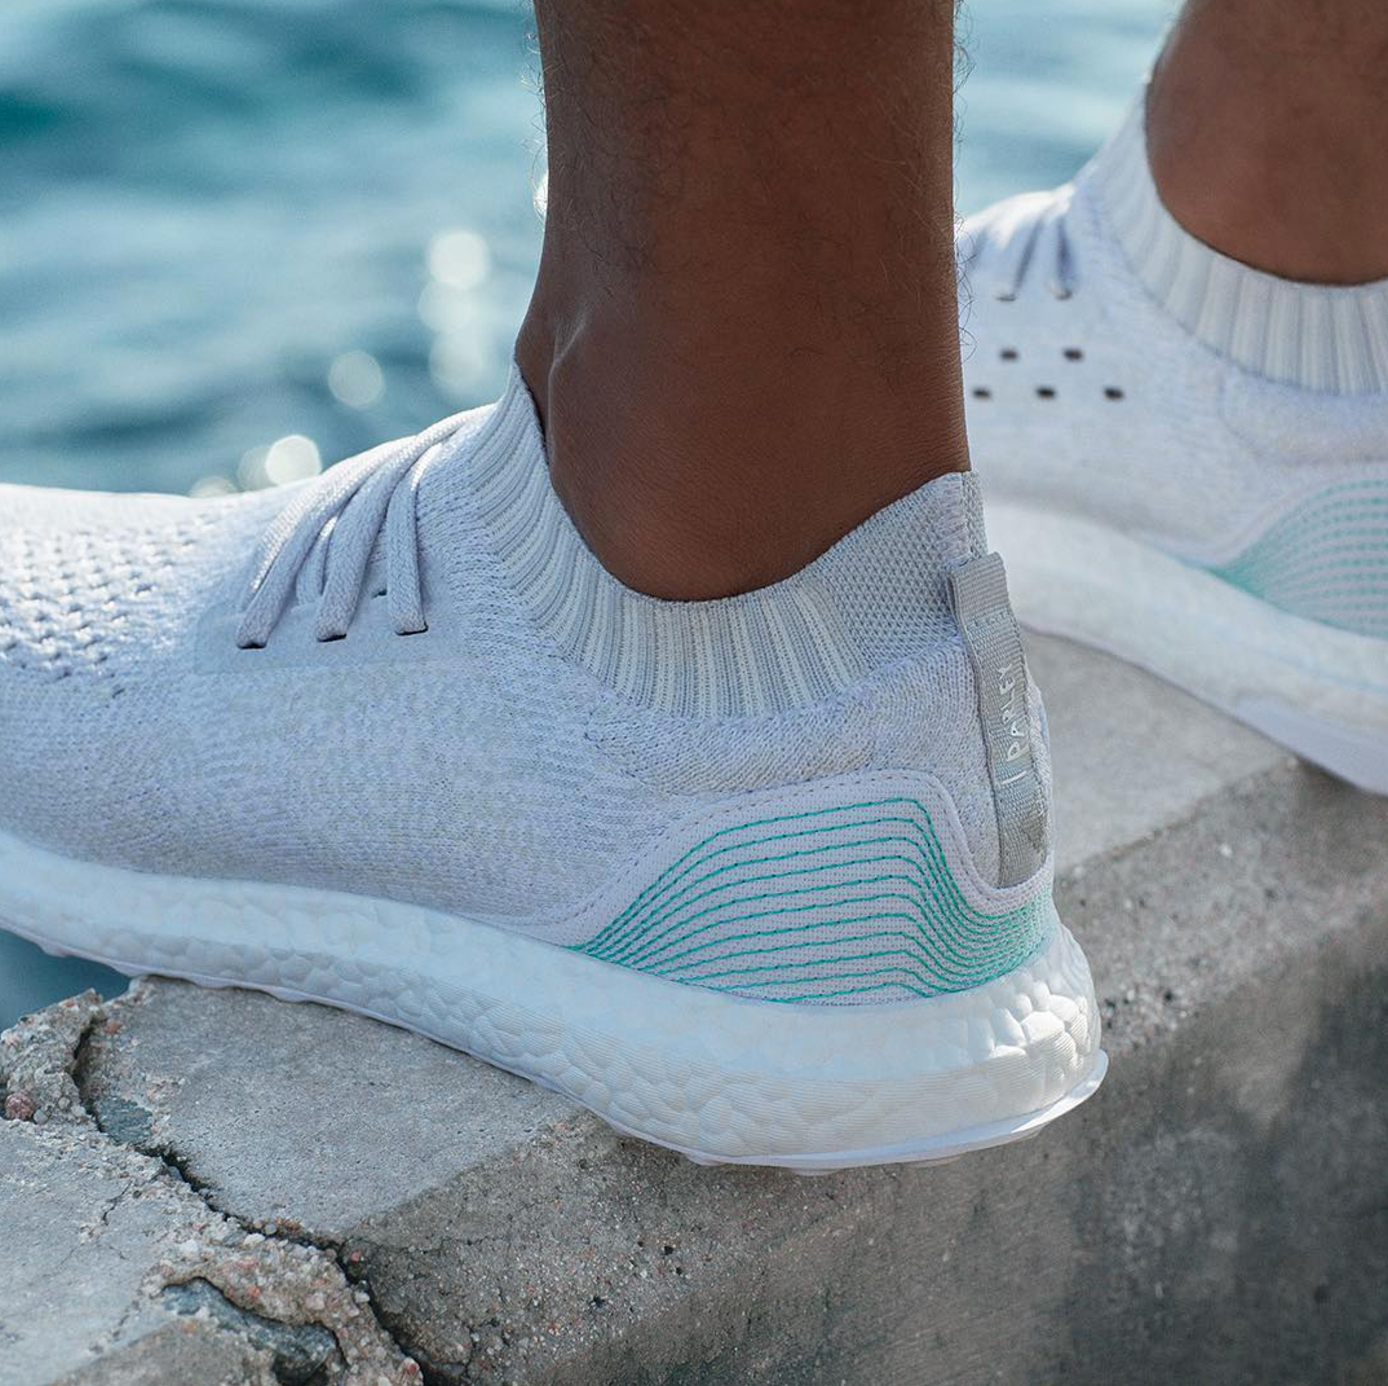 The adidas Uncaged Parley for the 